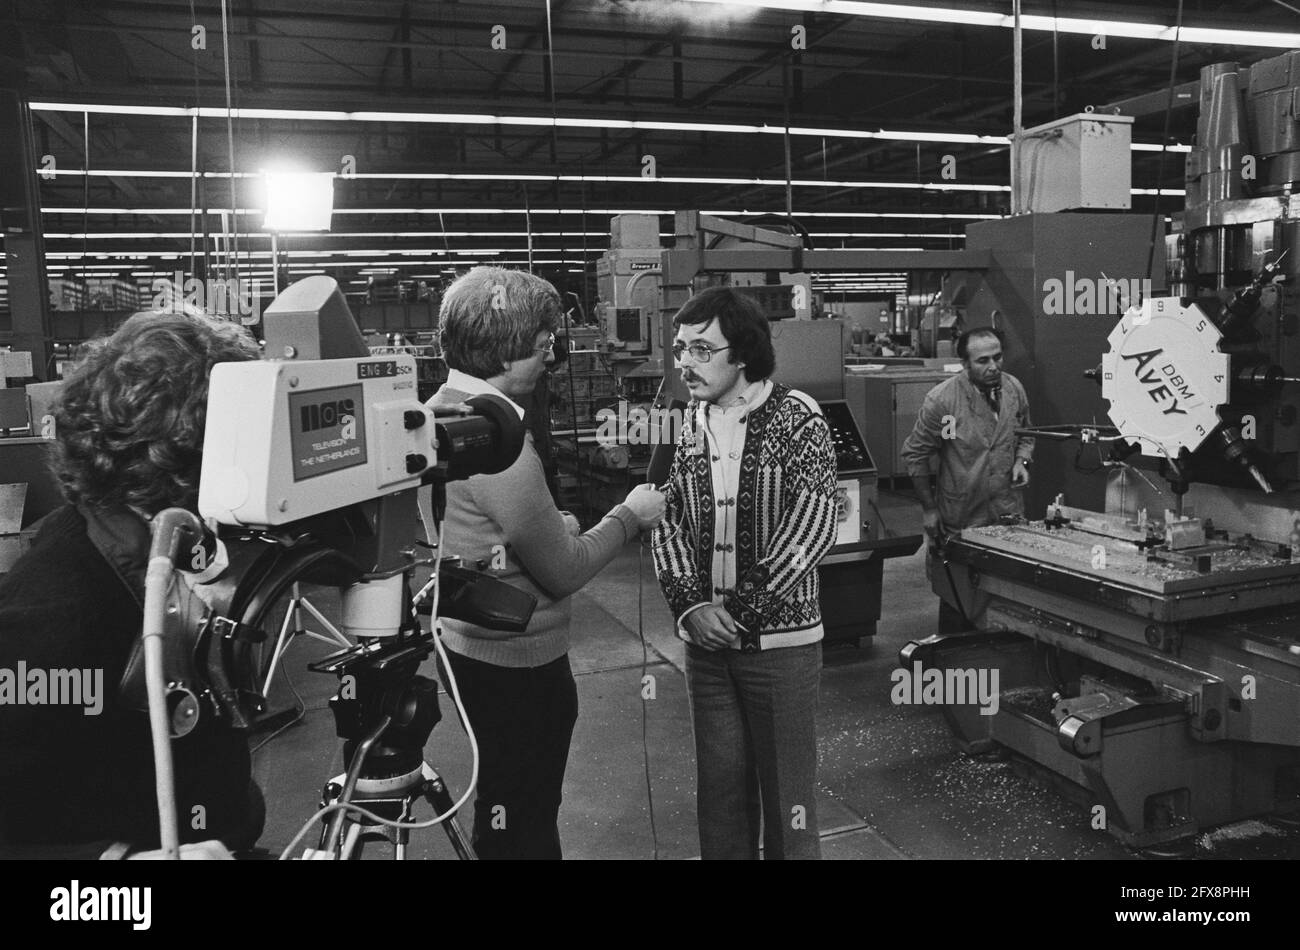 Occupation of Tealtronic; NOS filming in factory hall, January 10, 1977, CONFERENCE, films, The Netherlands, 20th century press agency photo, news to remember, documentary, historic photography 1945-1990, visual stories, human history of the Twentieth Century, capturing moments in time Stock Photo